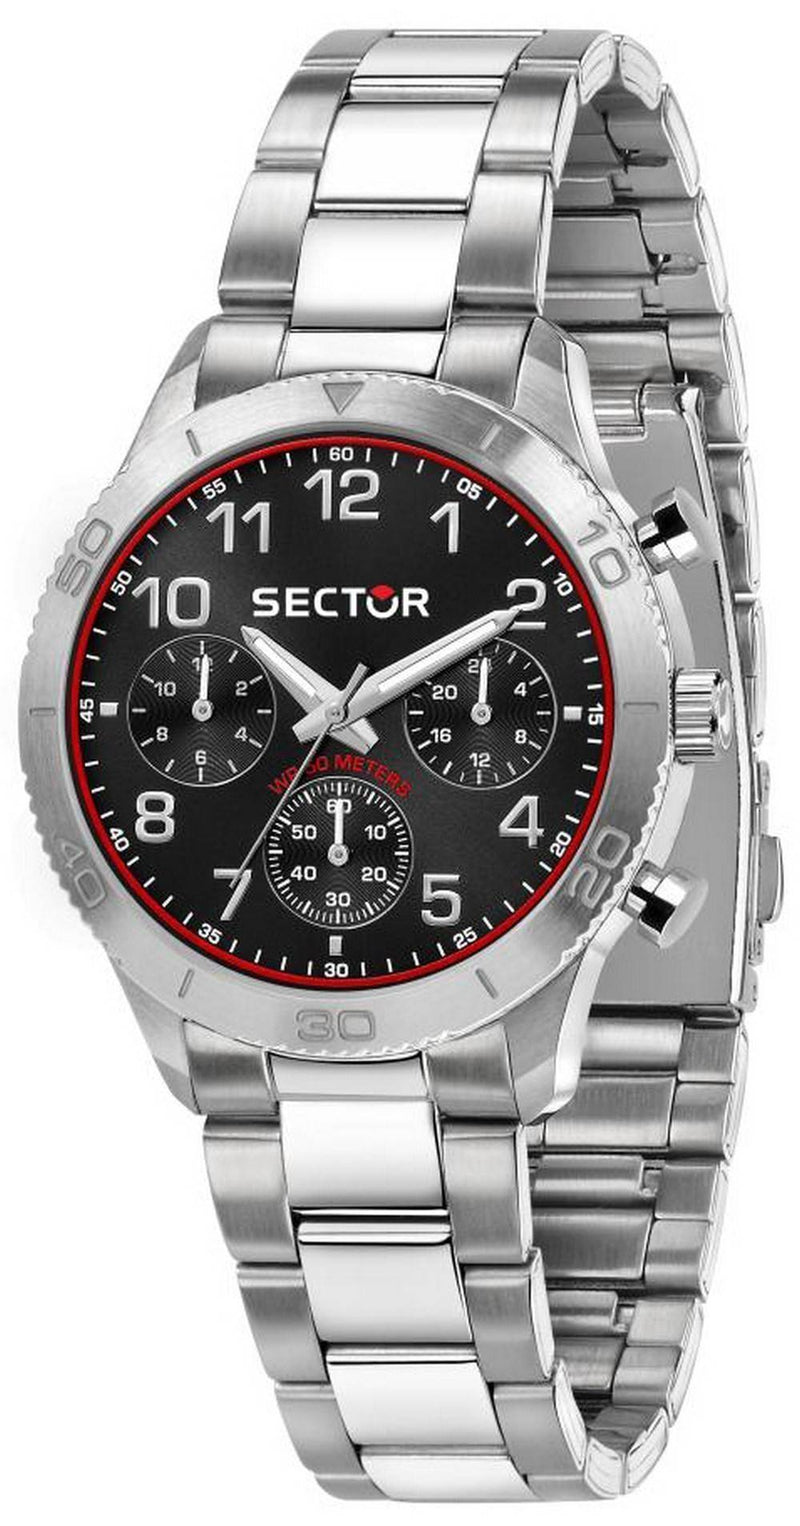 Sector 270 Chronograph Black Sunray Dial Stainless Steel Quartz R3253578017 Men's Watch